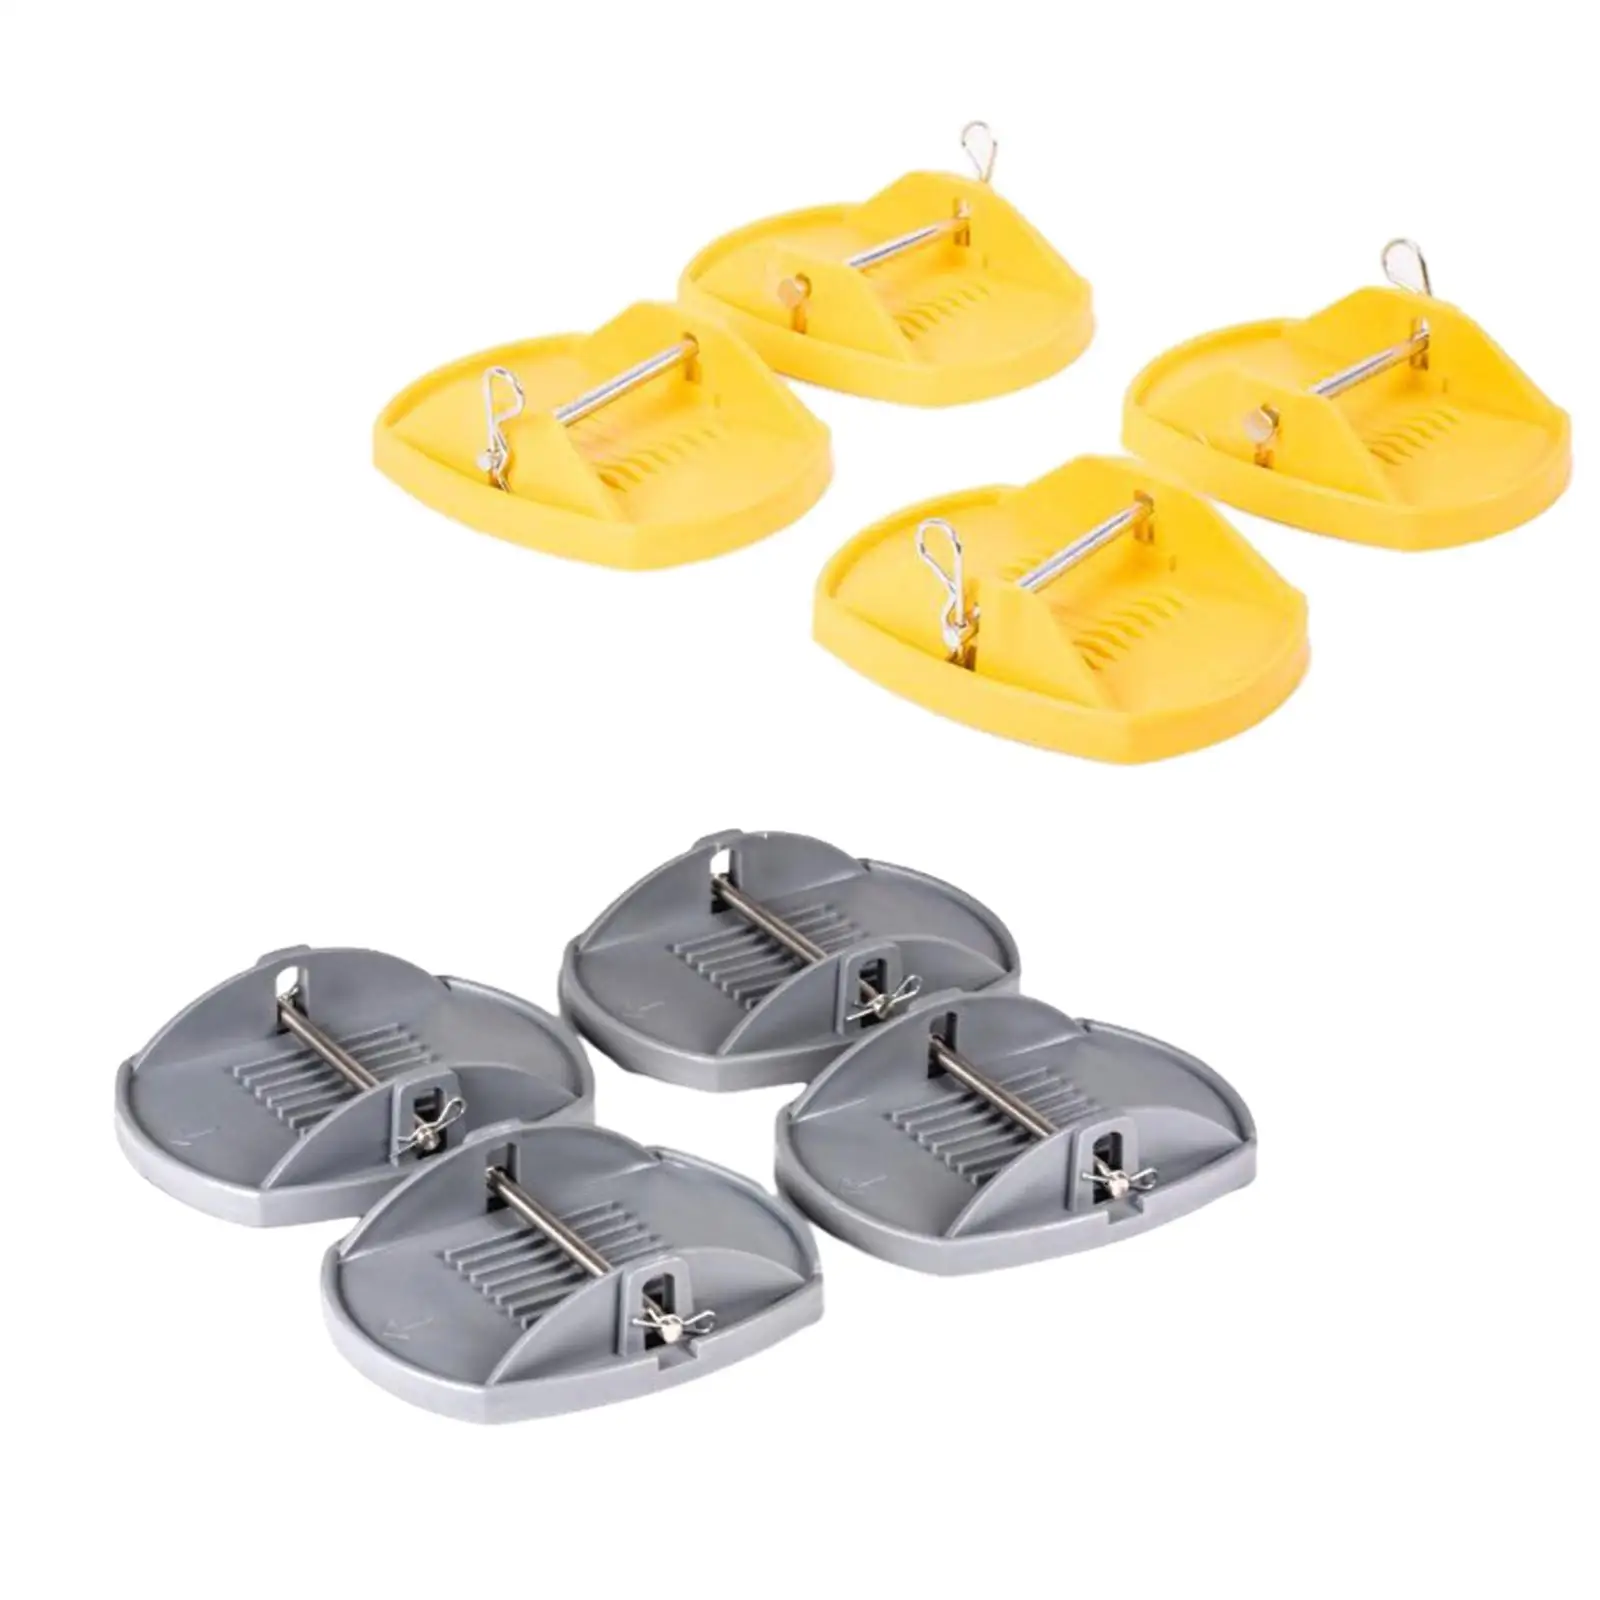 4 Pieces Jack Pad Adapter Professional Easy Installation Heavy Duty for RV Wear Resistant Jack Foot Support Stand Jack Lift Pad